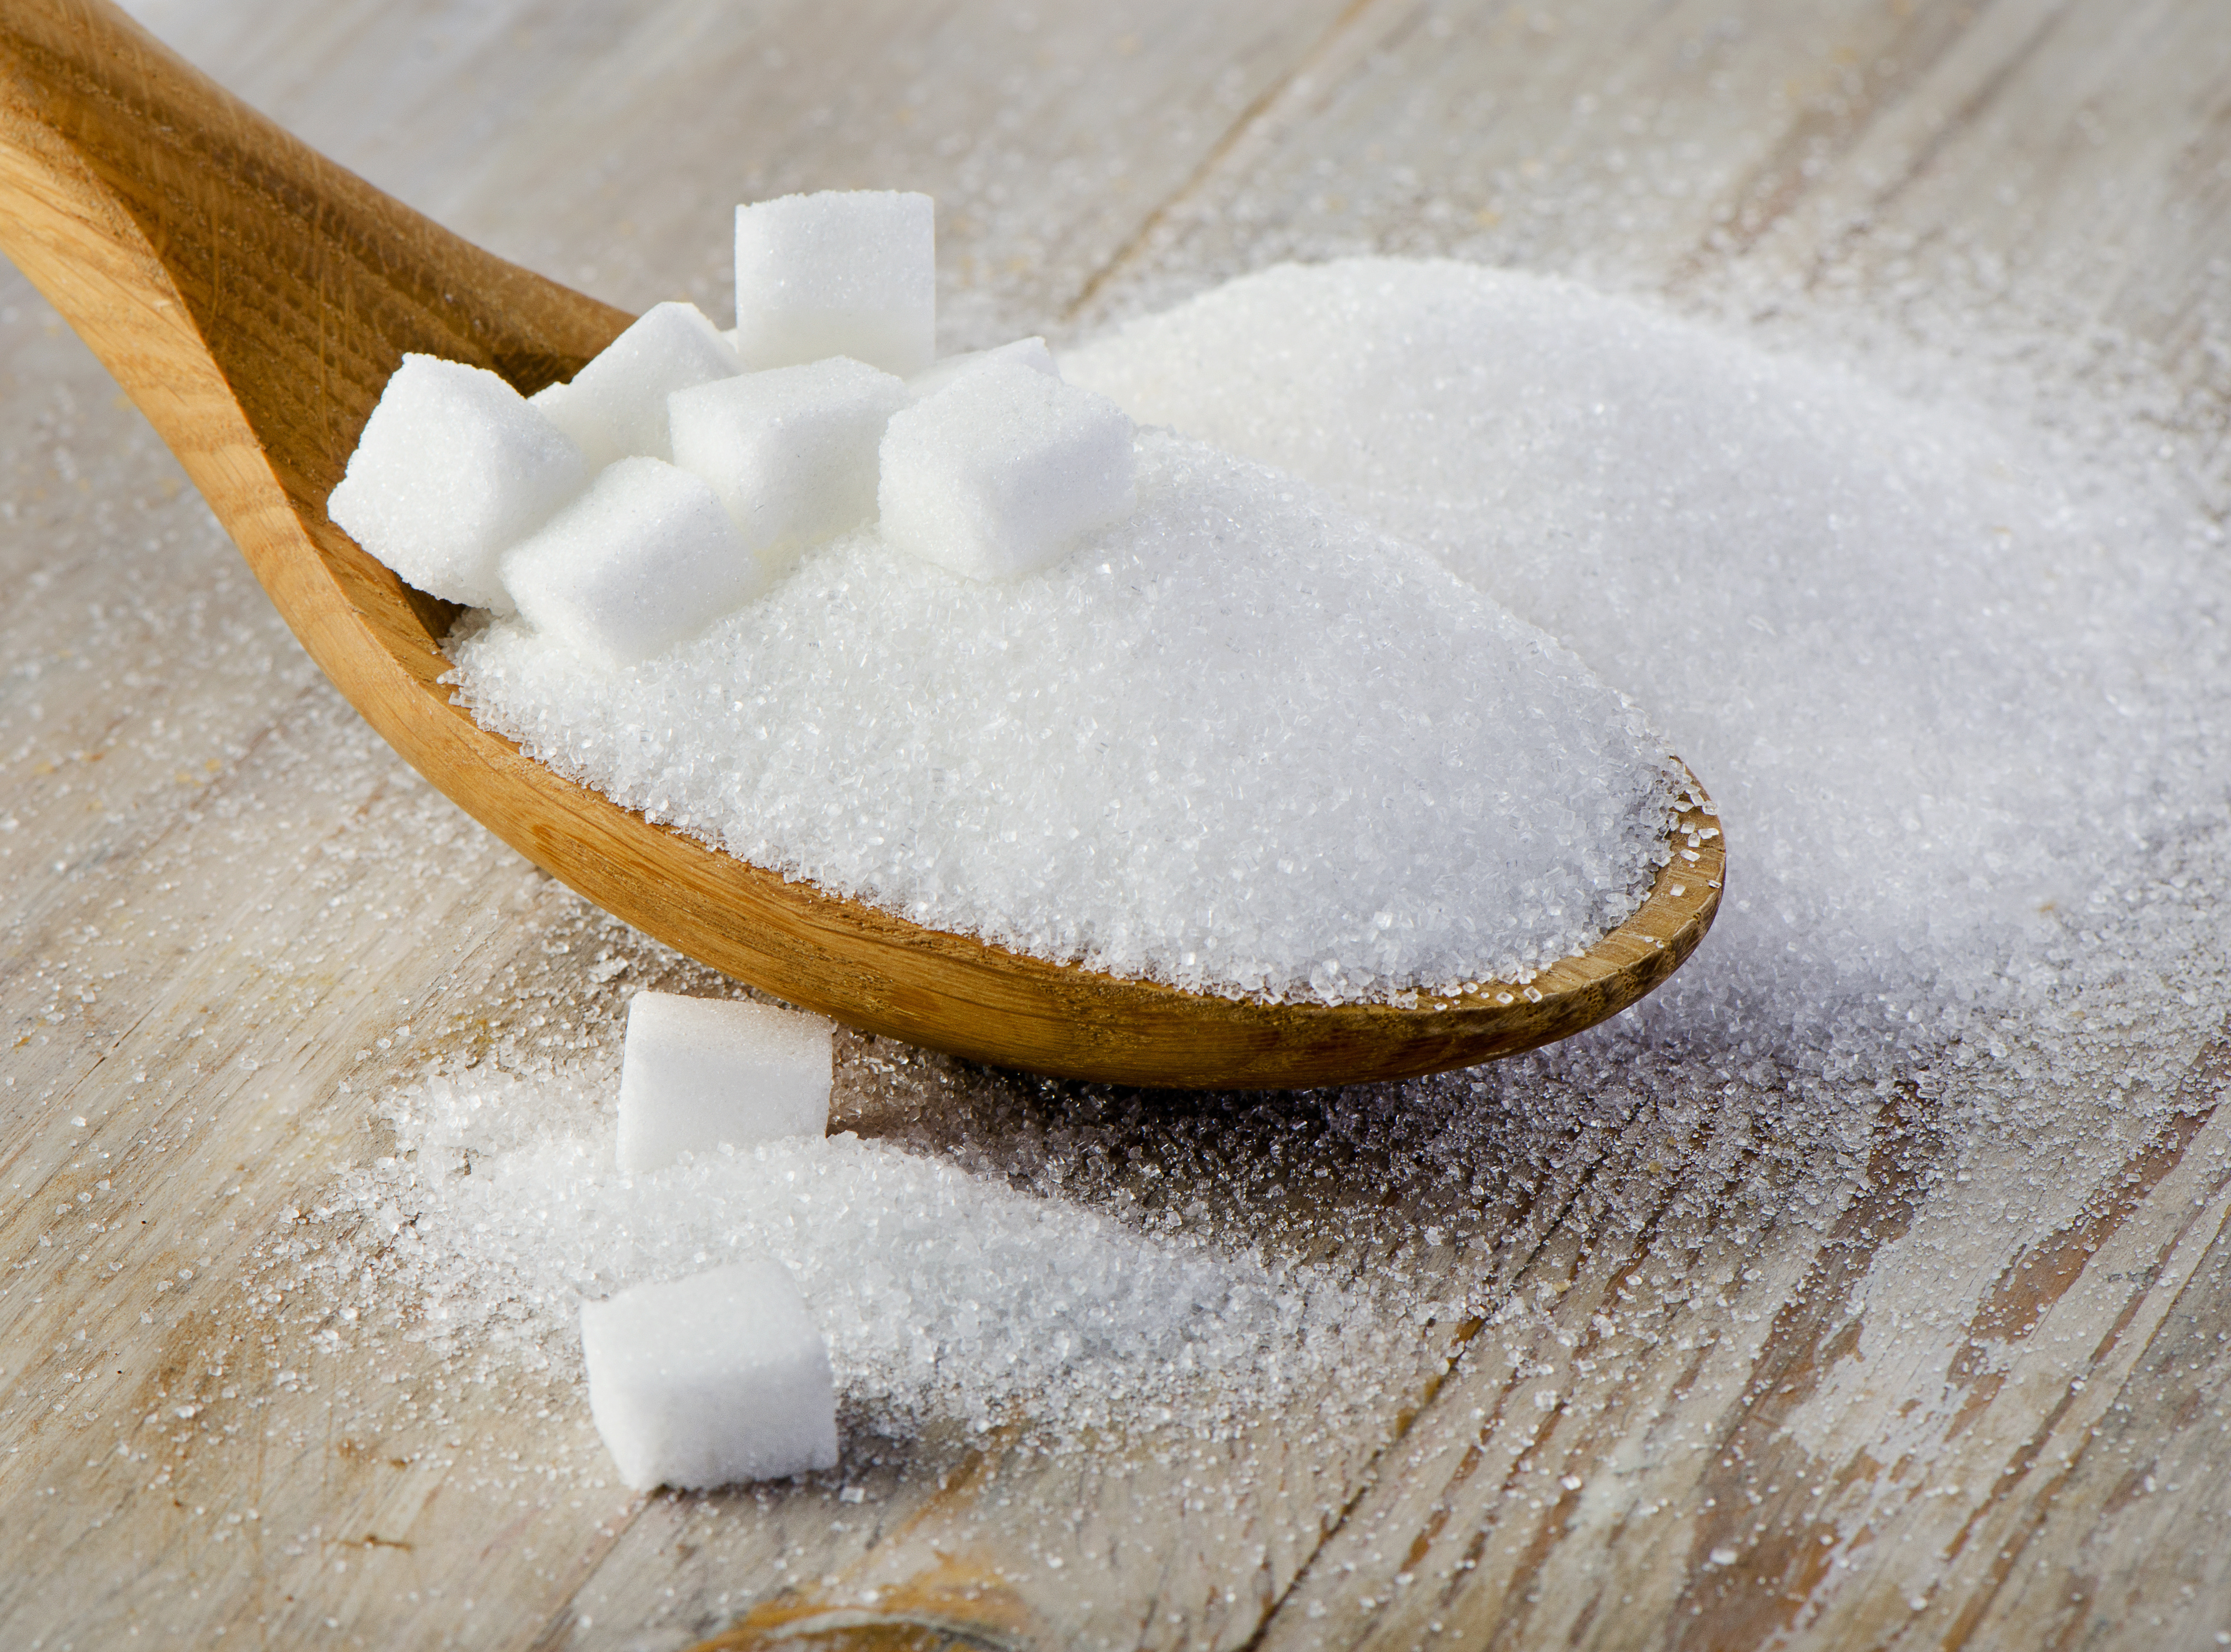 Americans eat an estimated 65 to 70 pounds of added sugar per year, the highest rate in the world. 